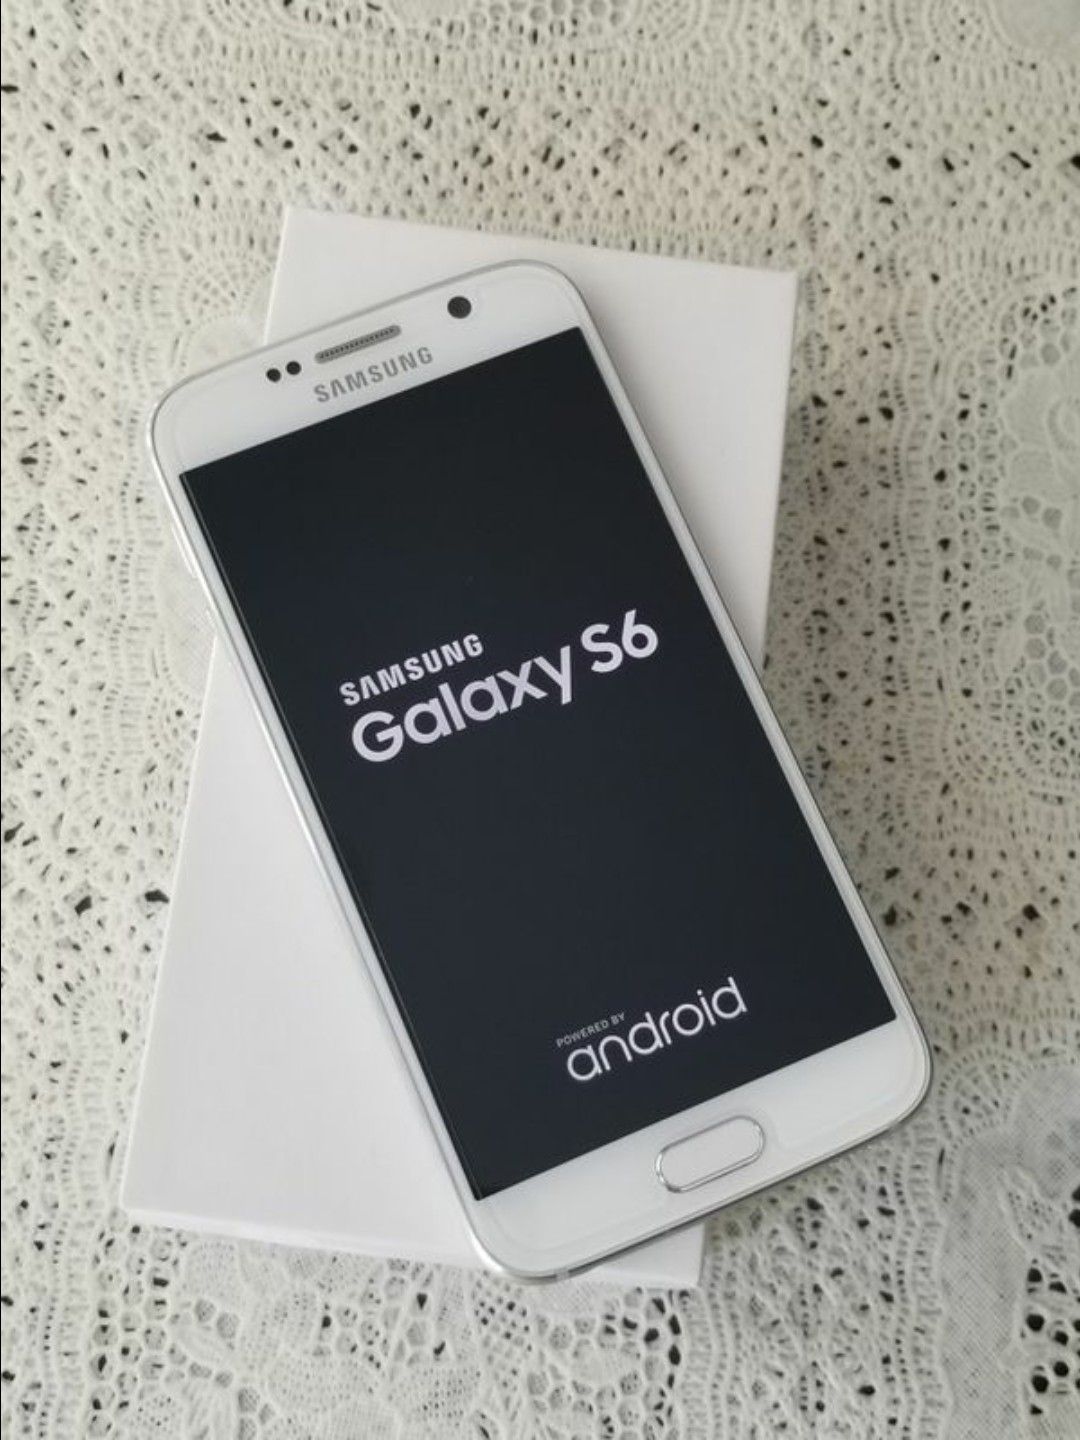 Samsung Galaxy S6. Factory Unlocked and Usable with Any Company Carrier SIM Any Country